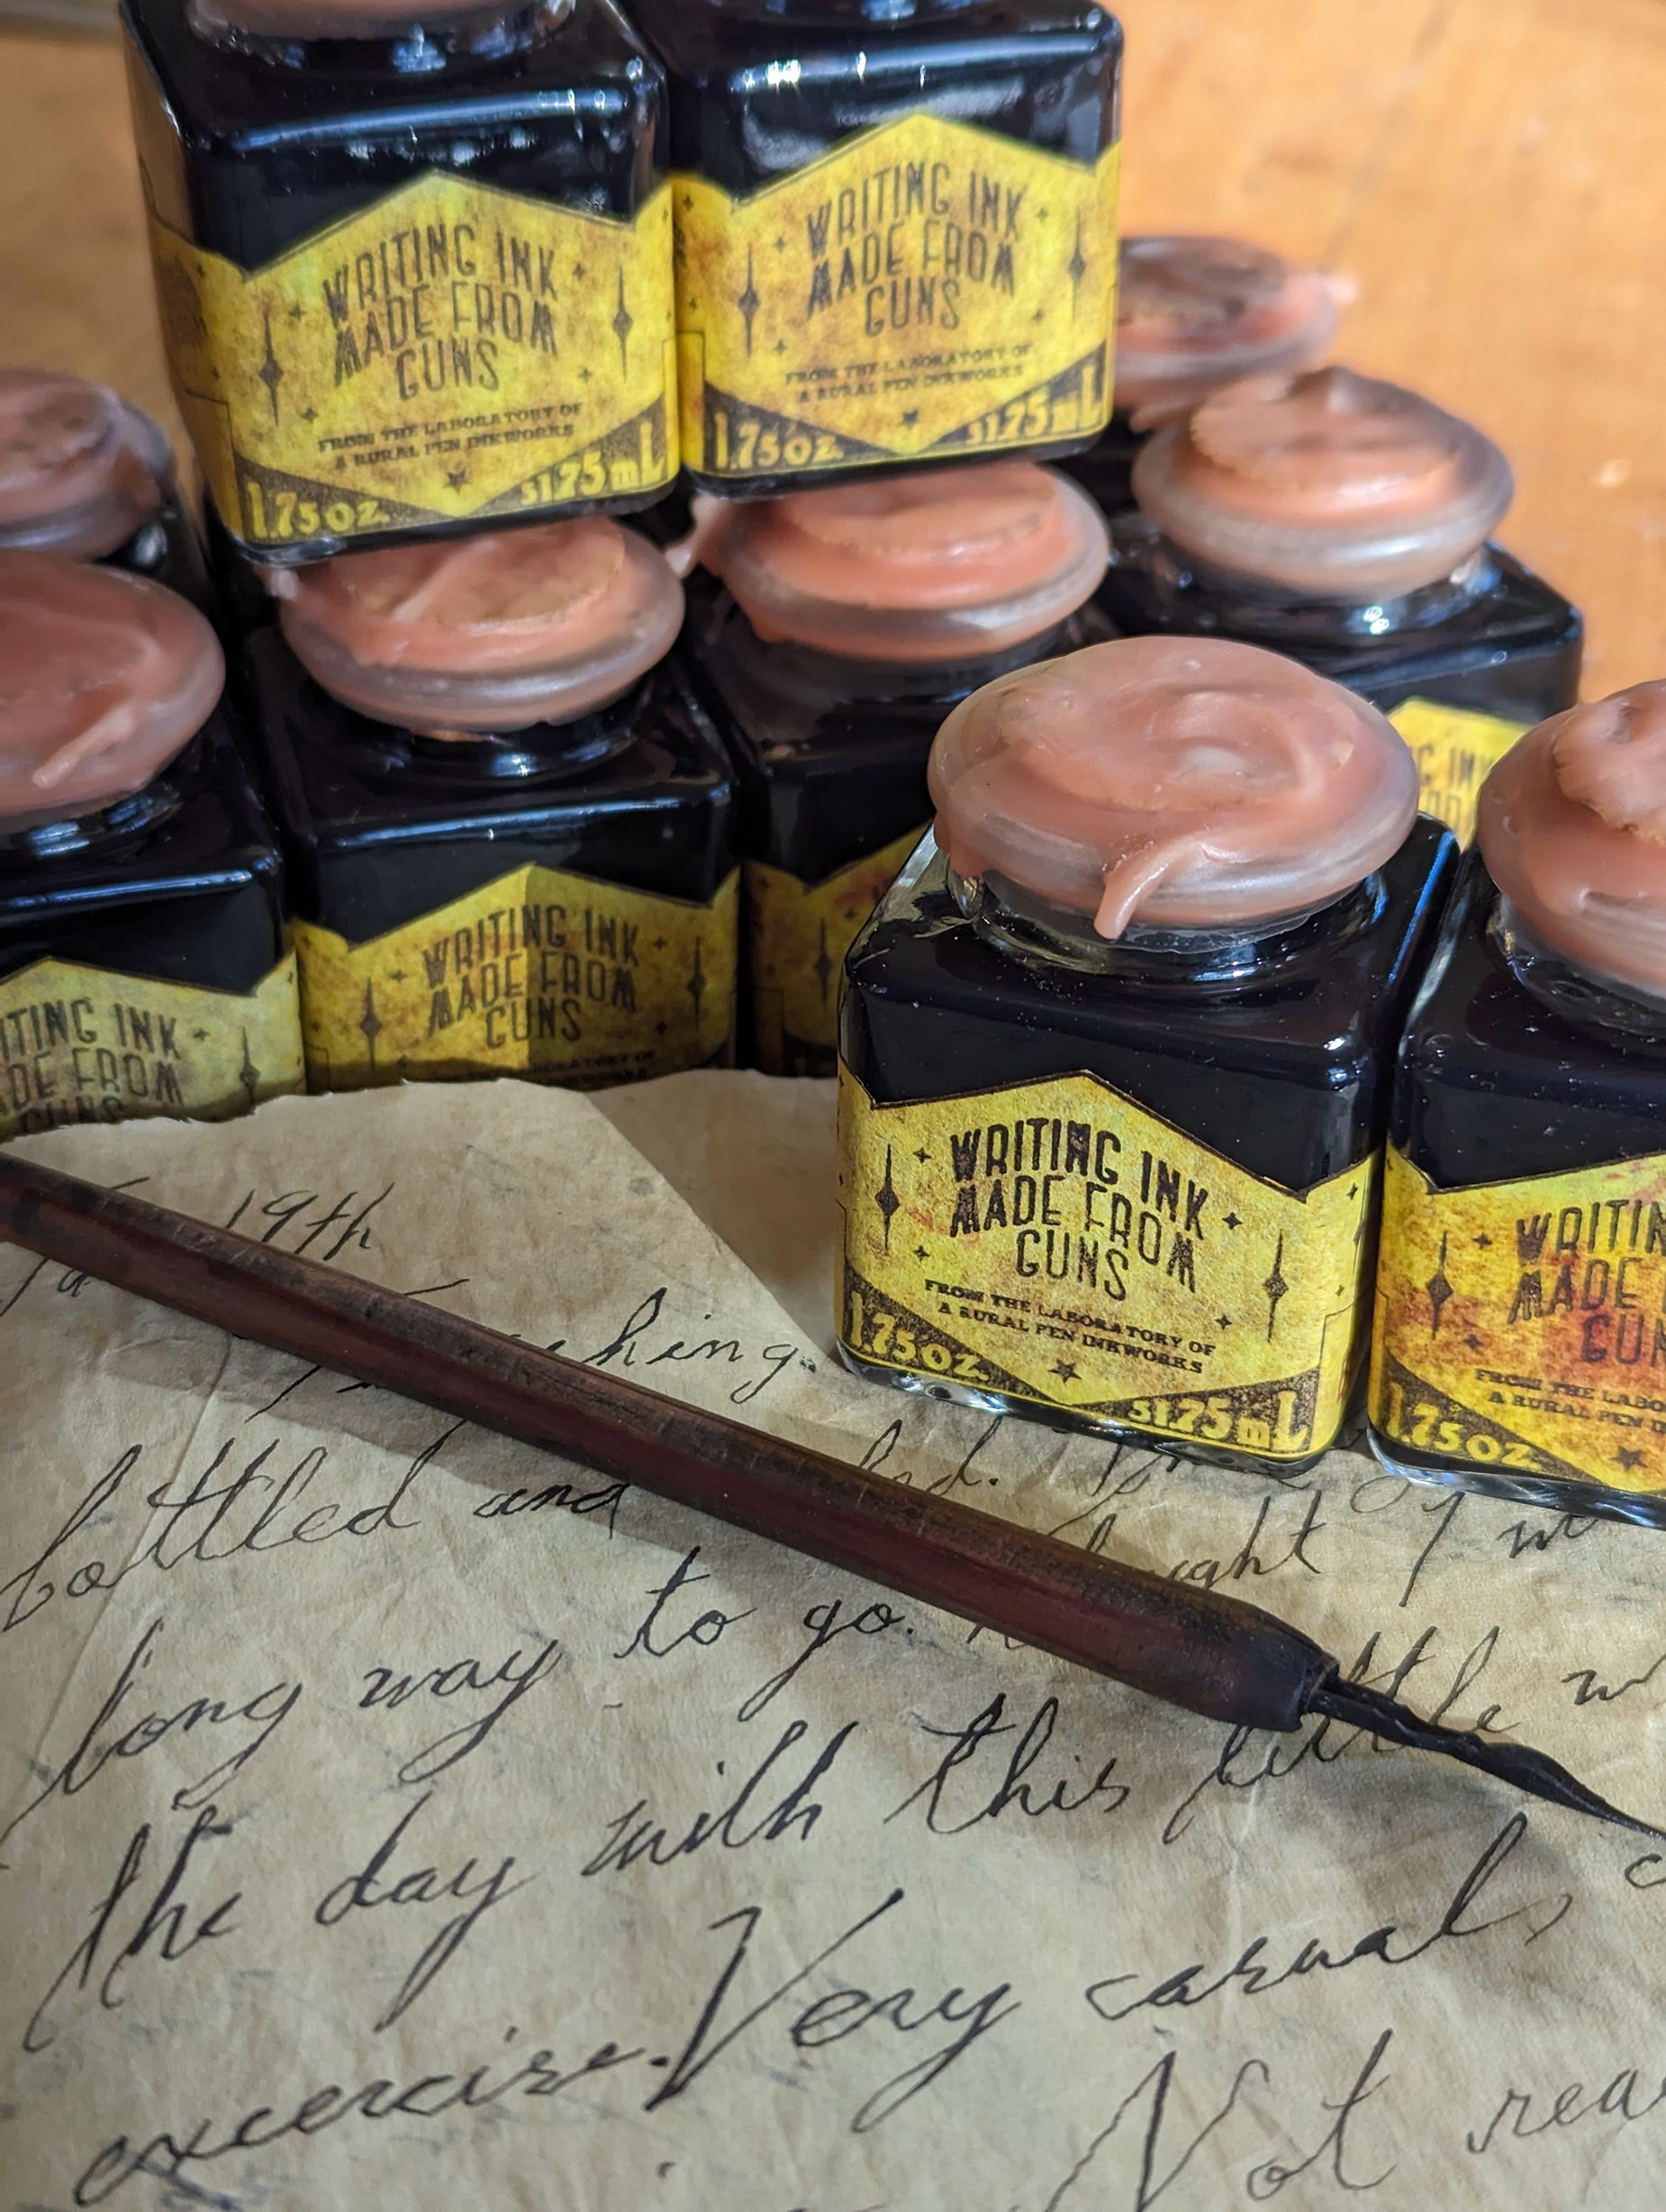 Little makes store orders for his writing ink, which is made from iron sulfate, tannic acid and gum Arabic.